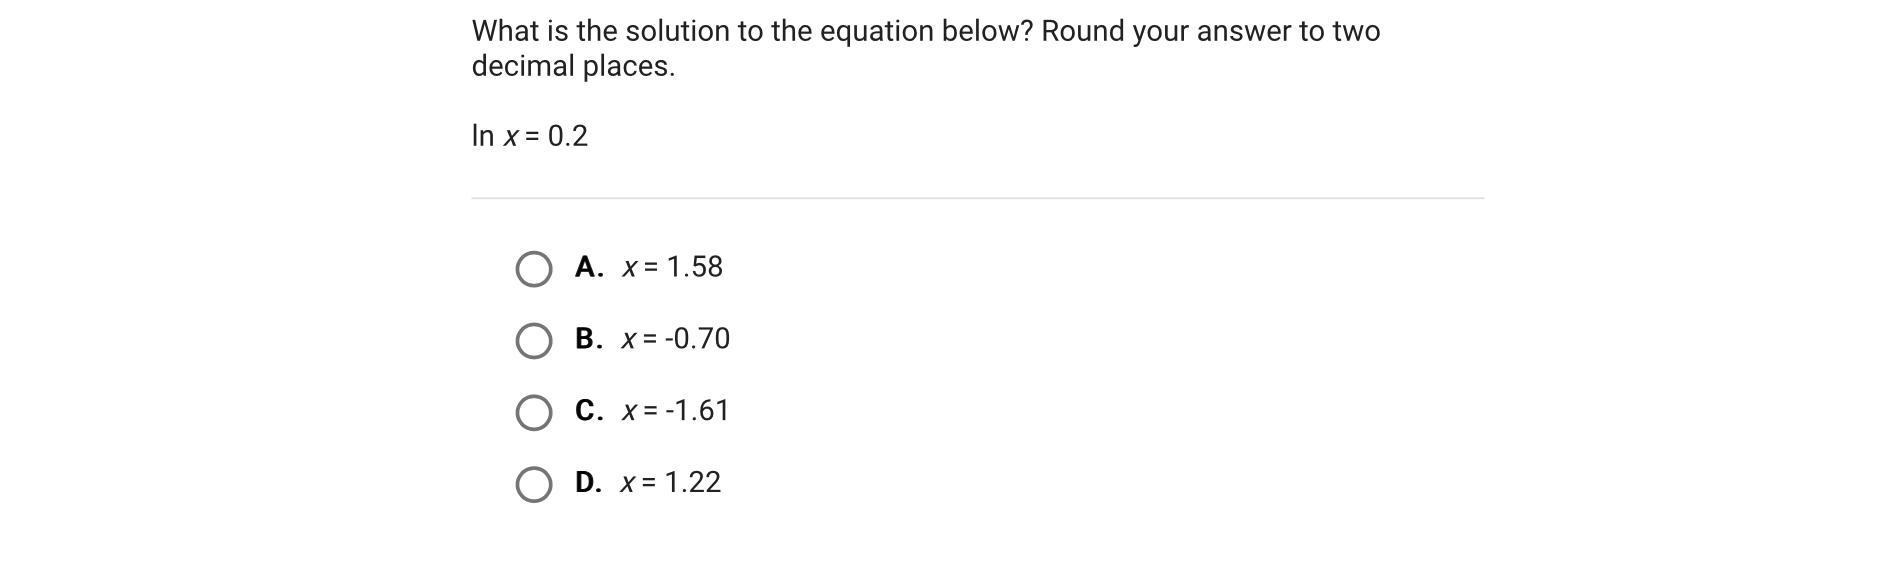 What Is The Solution To The Equation Below? Round Your Answer To Two Decimal Places.ln X = 0.2A.x = 1.58B.x